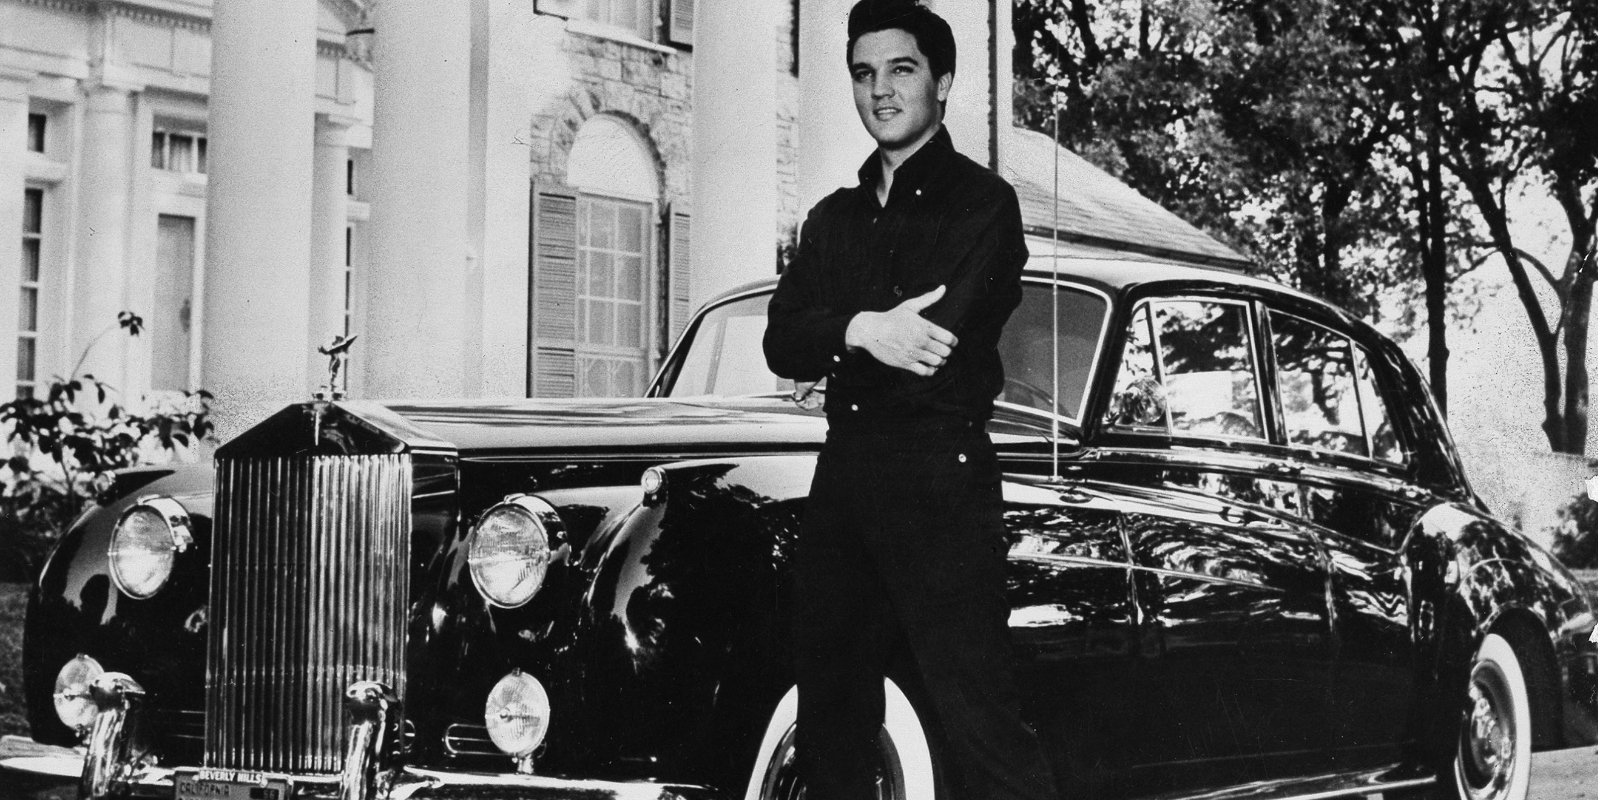 Elvis Presley poses in front of Graceland in a black and white image.